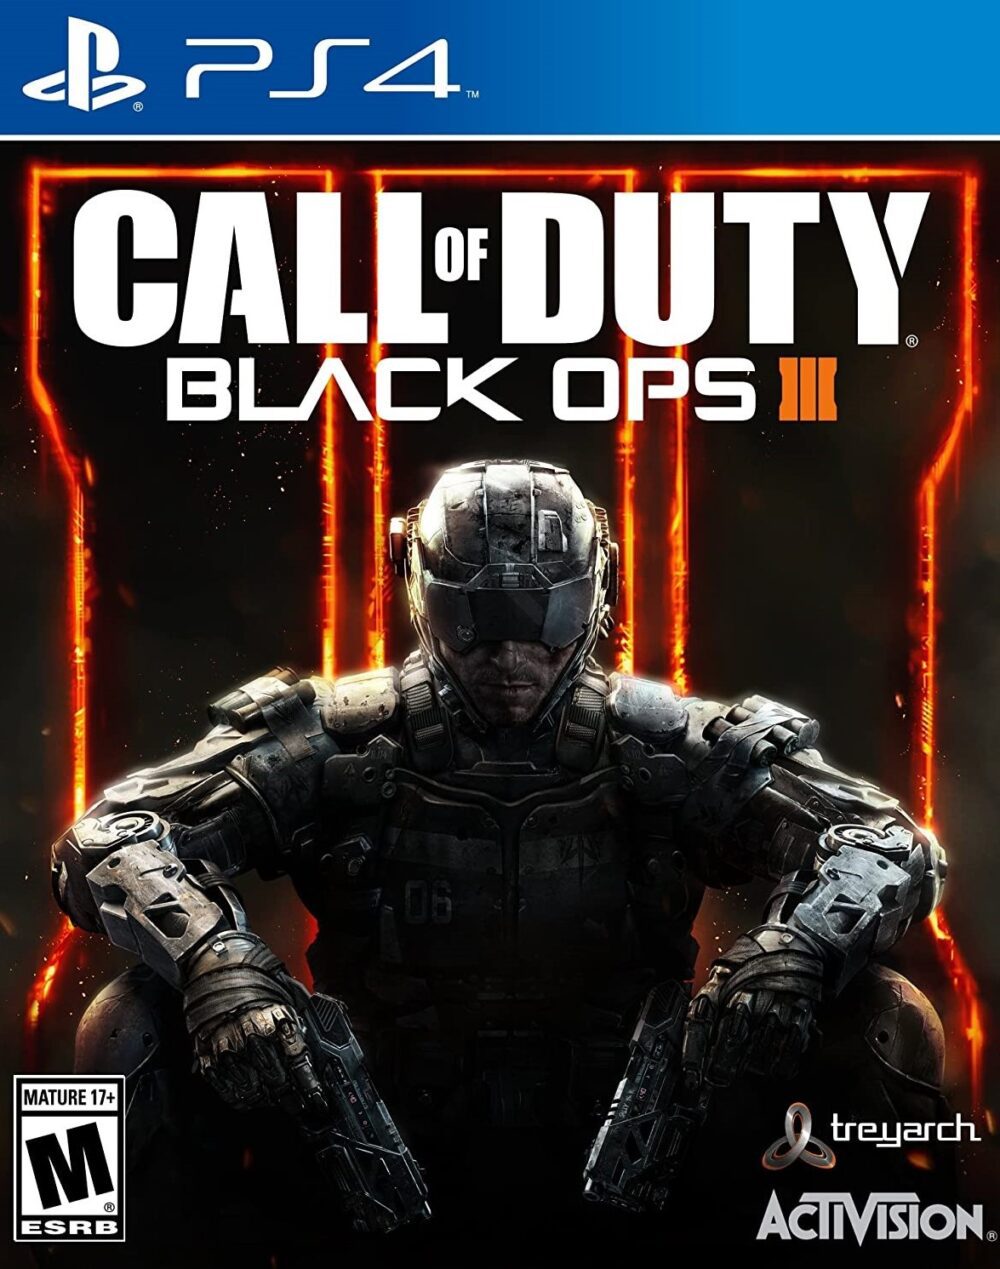 Call of Duty: Black Ops III for PS4